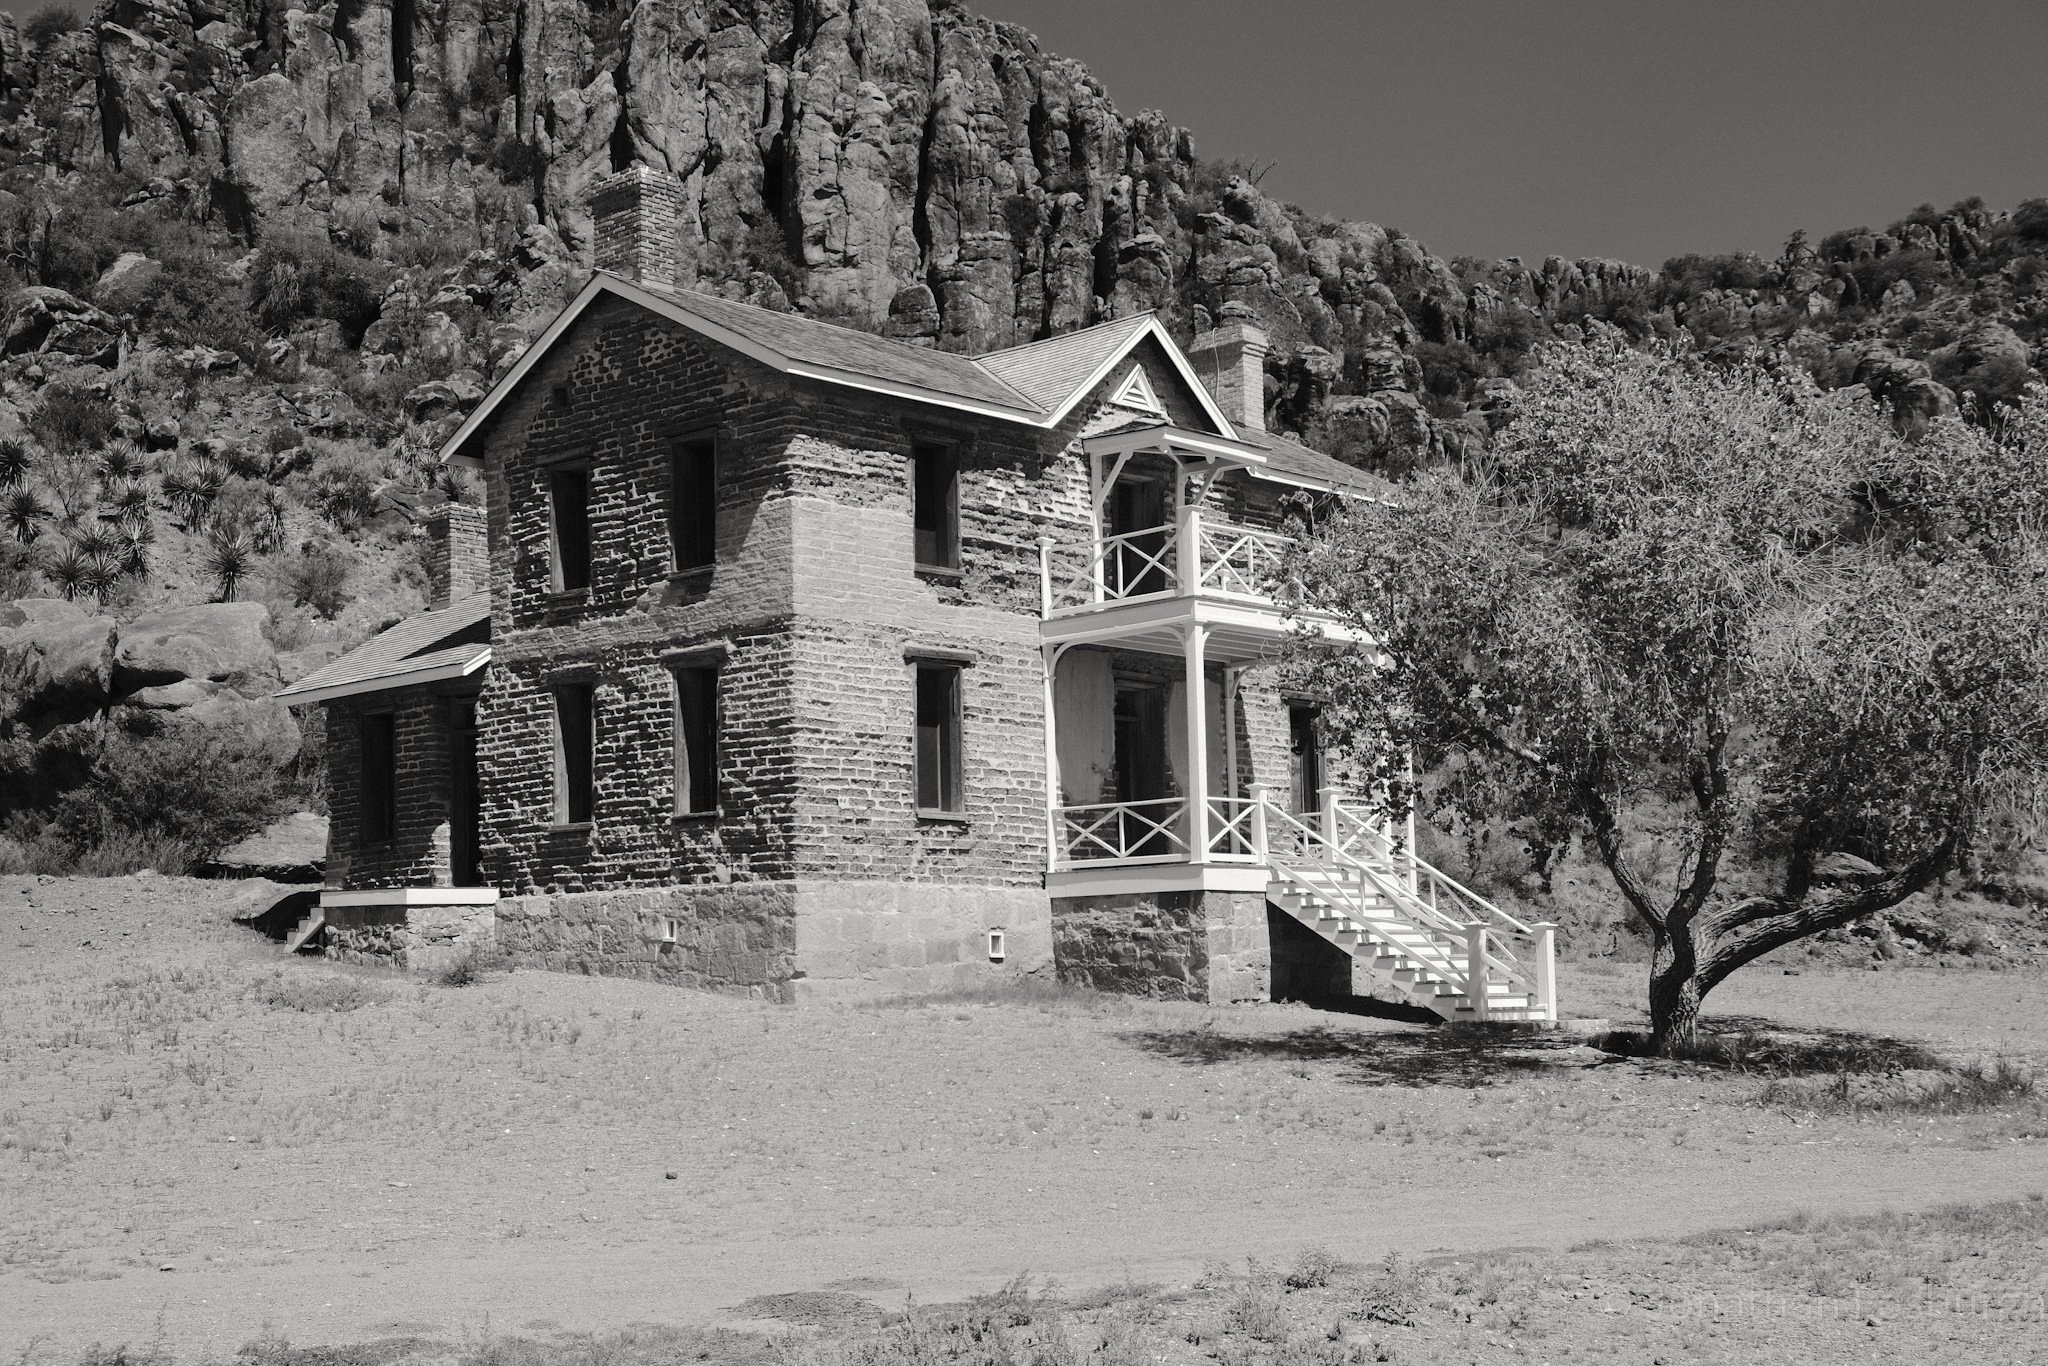 Fort Davis National Historic Site, Fort Davis, TX - A selection of my best images over time